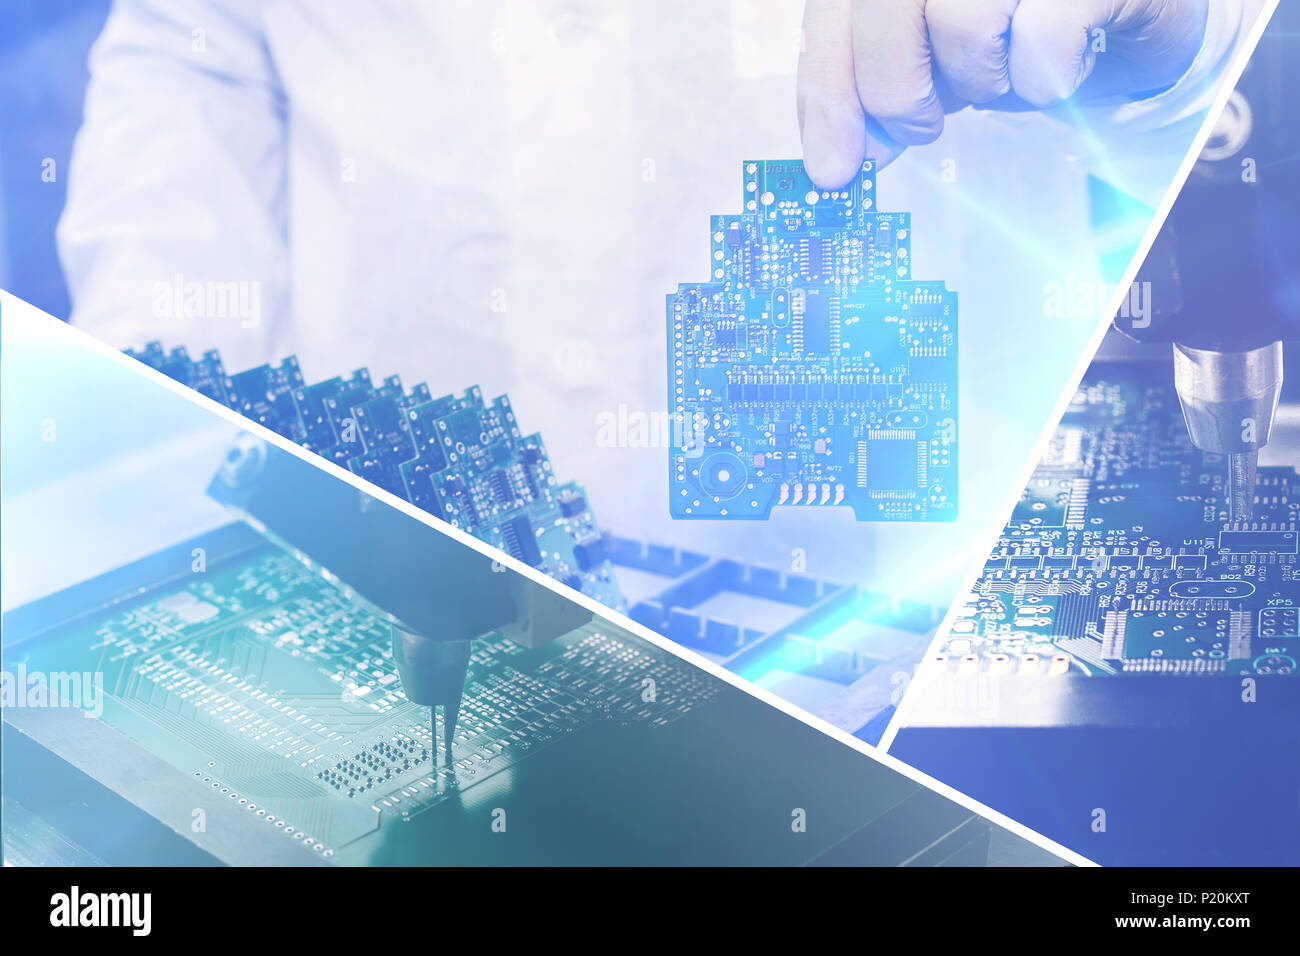 Collage of computer boards with visual effects in a futuristic style. The concept of modern and future technologies Stock Photo